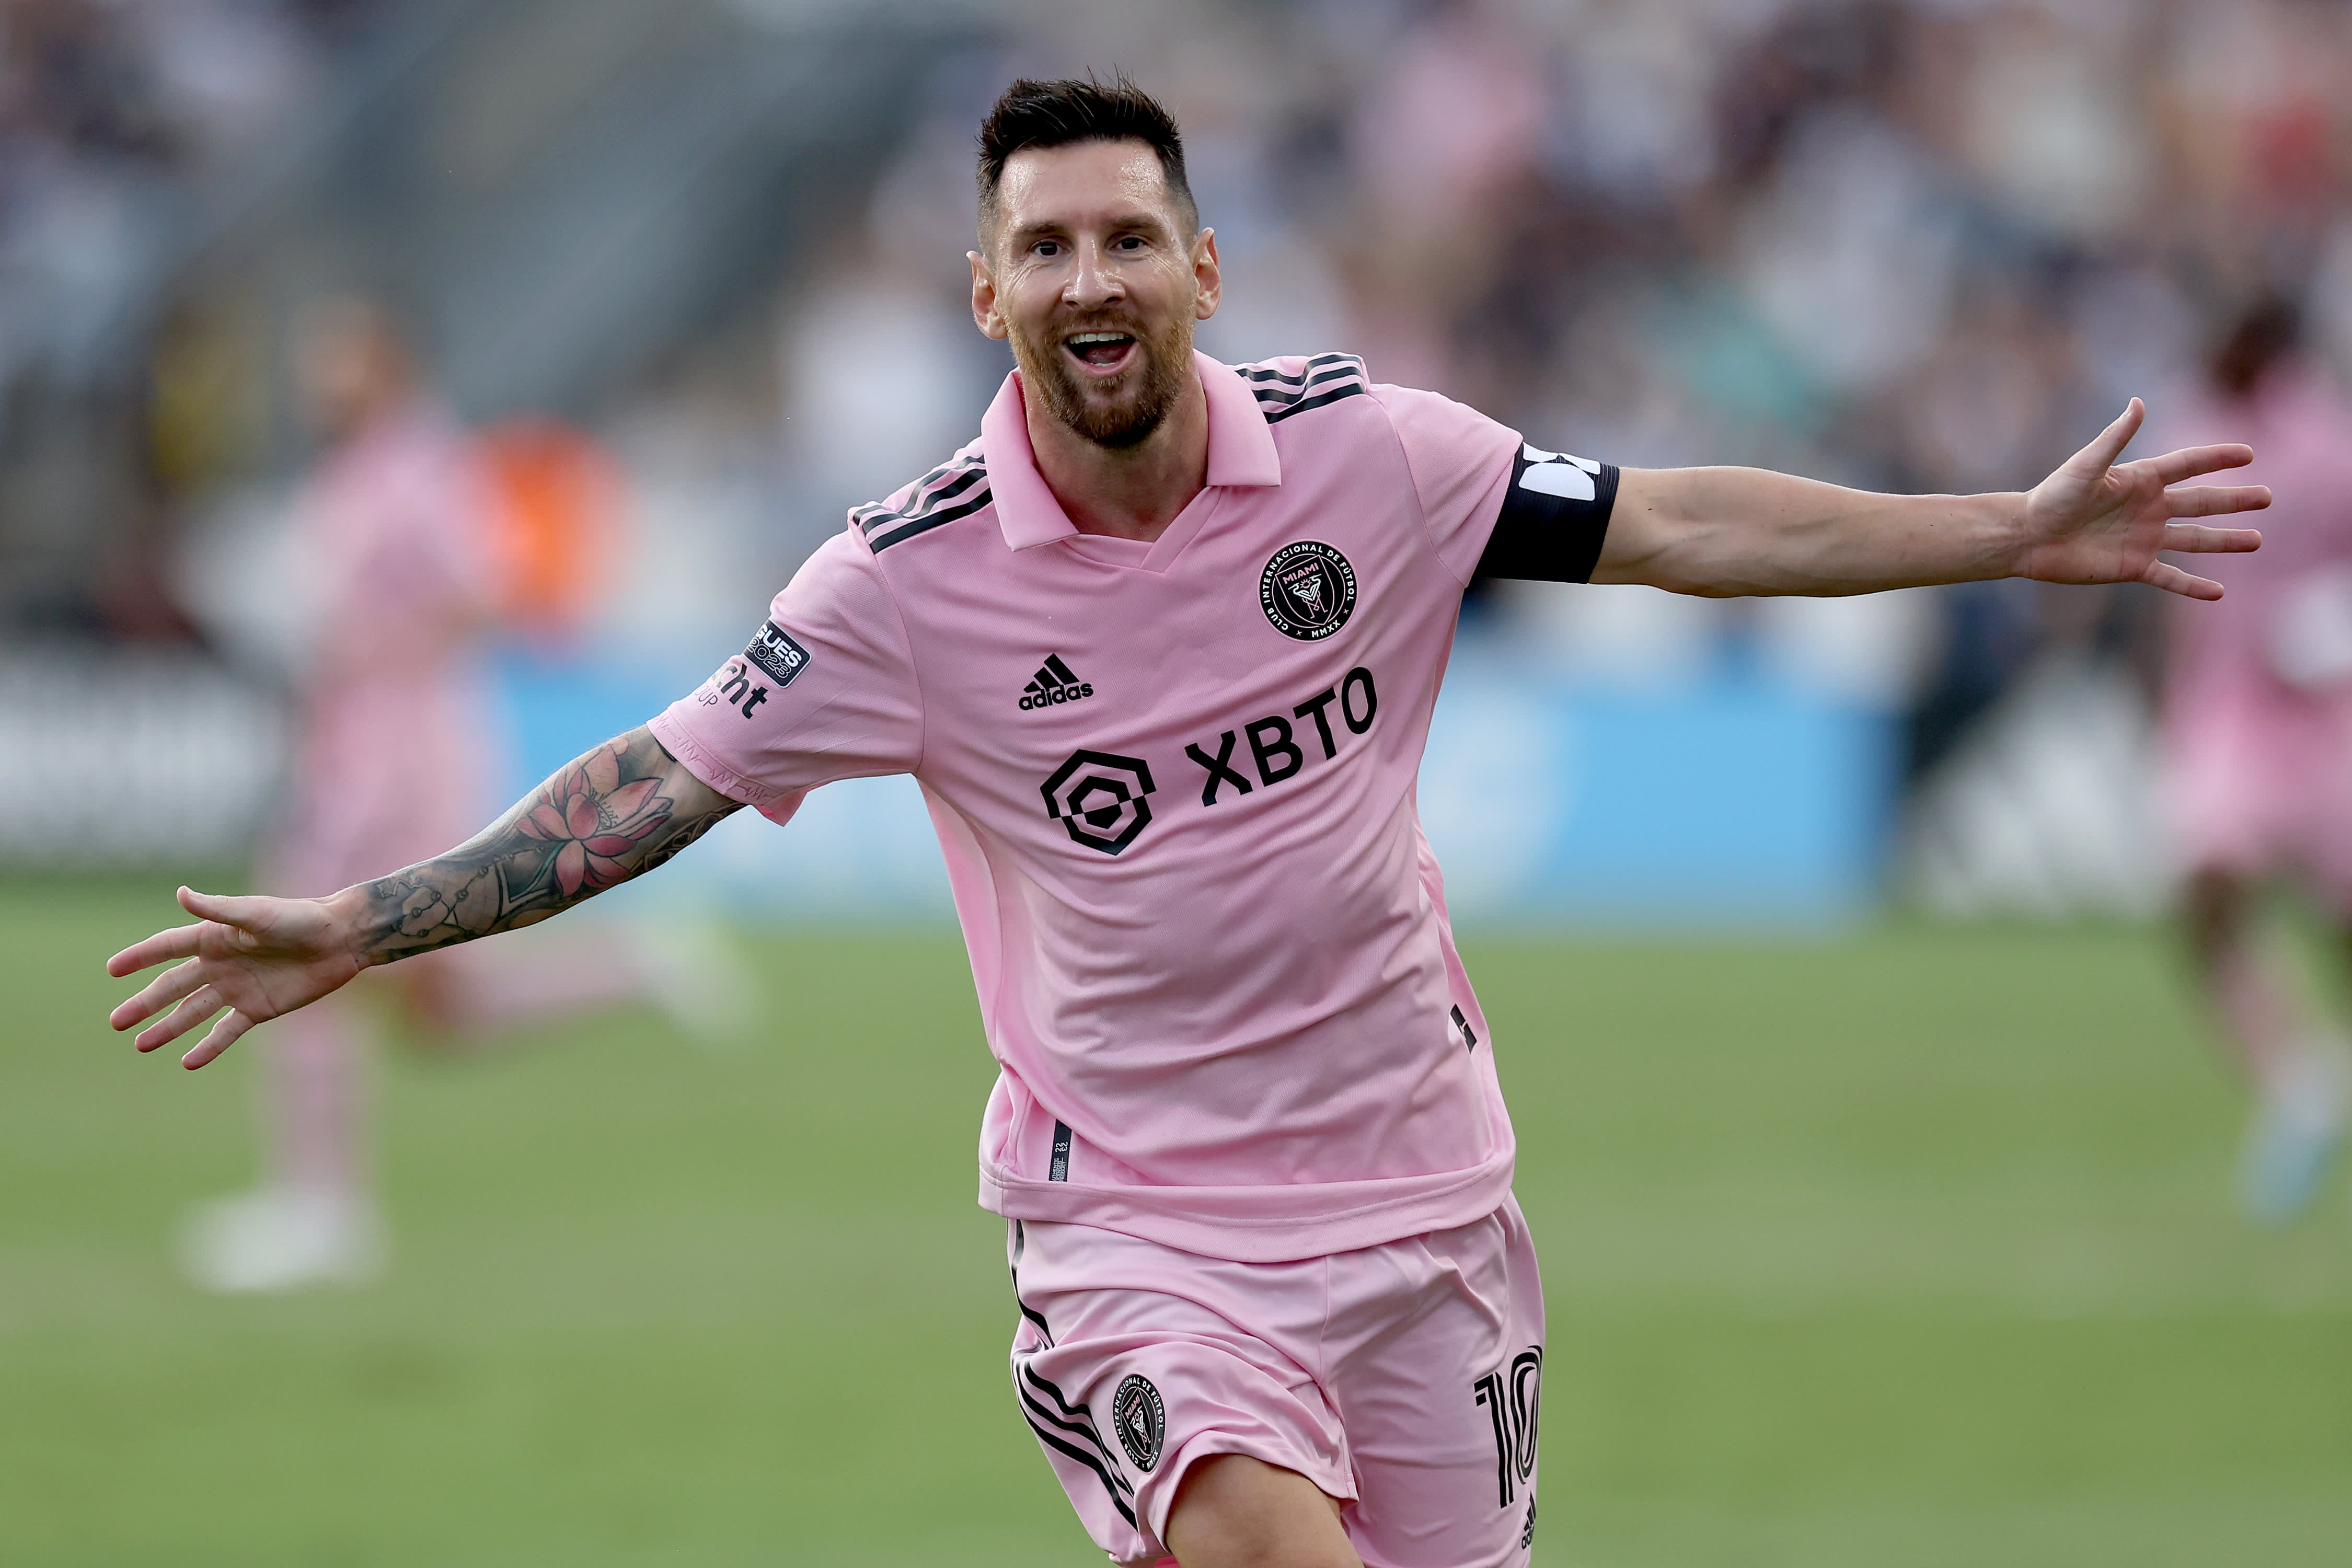 Inter Miami plays in Hong Kong in February, and fans get to meet Lionel Messi